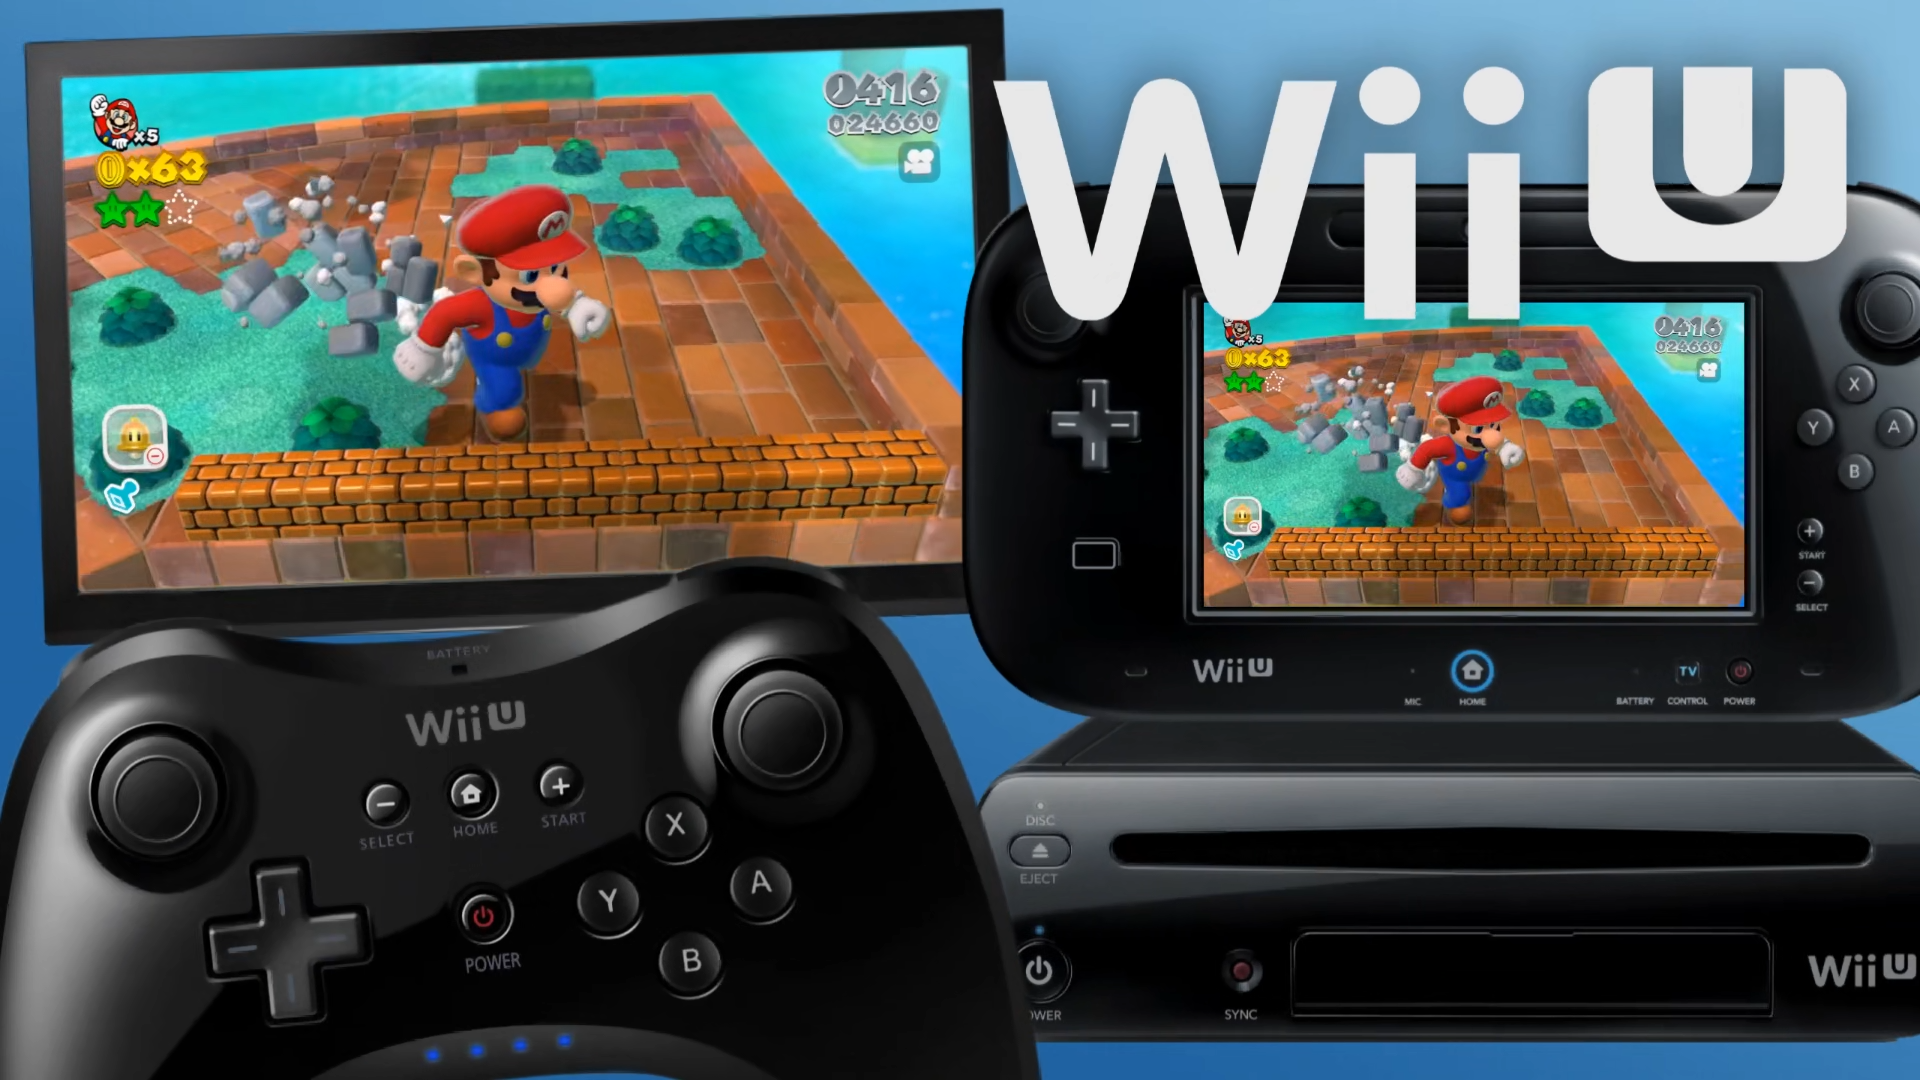 Cemu (Wii U) isn't being recognized as a platform, can't import games  (.rpx) - Troubleshooting - LaunchBox Community Forums